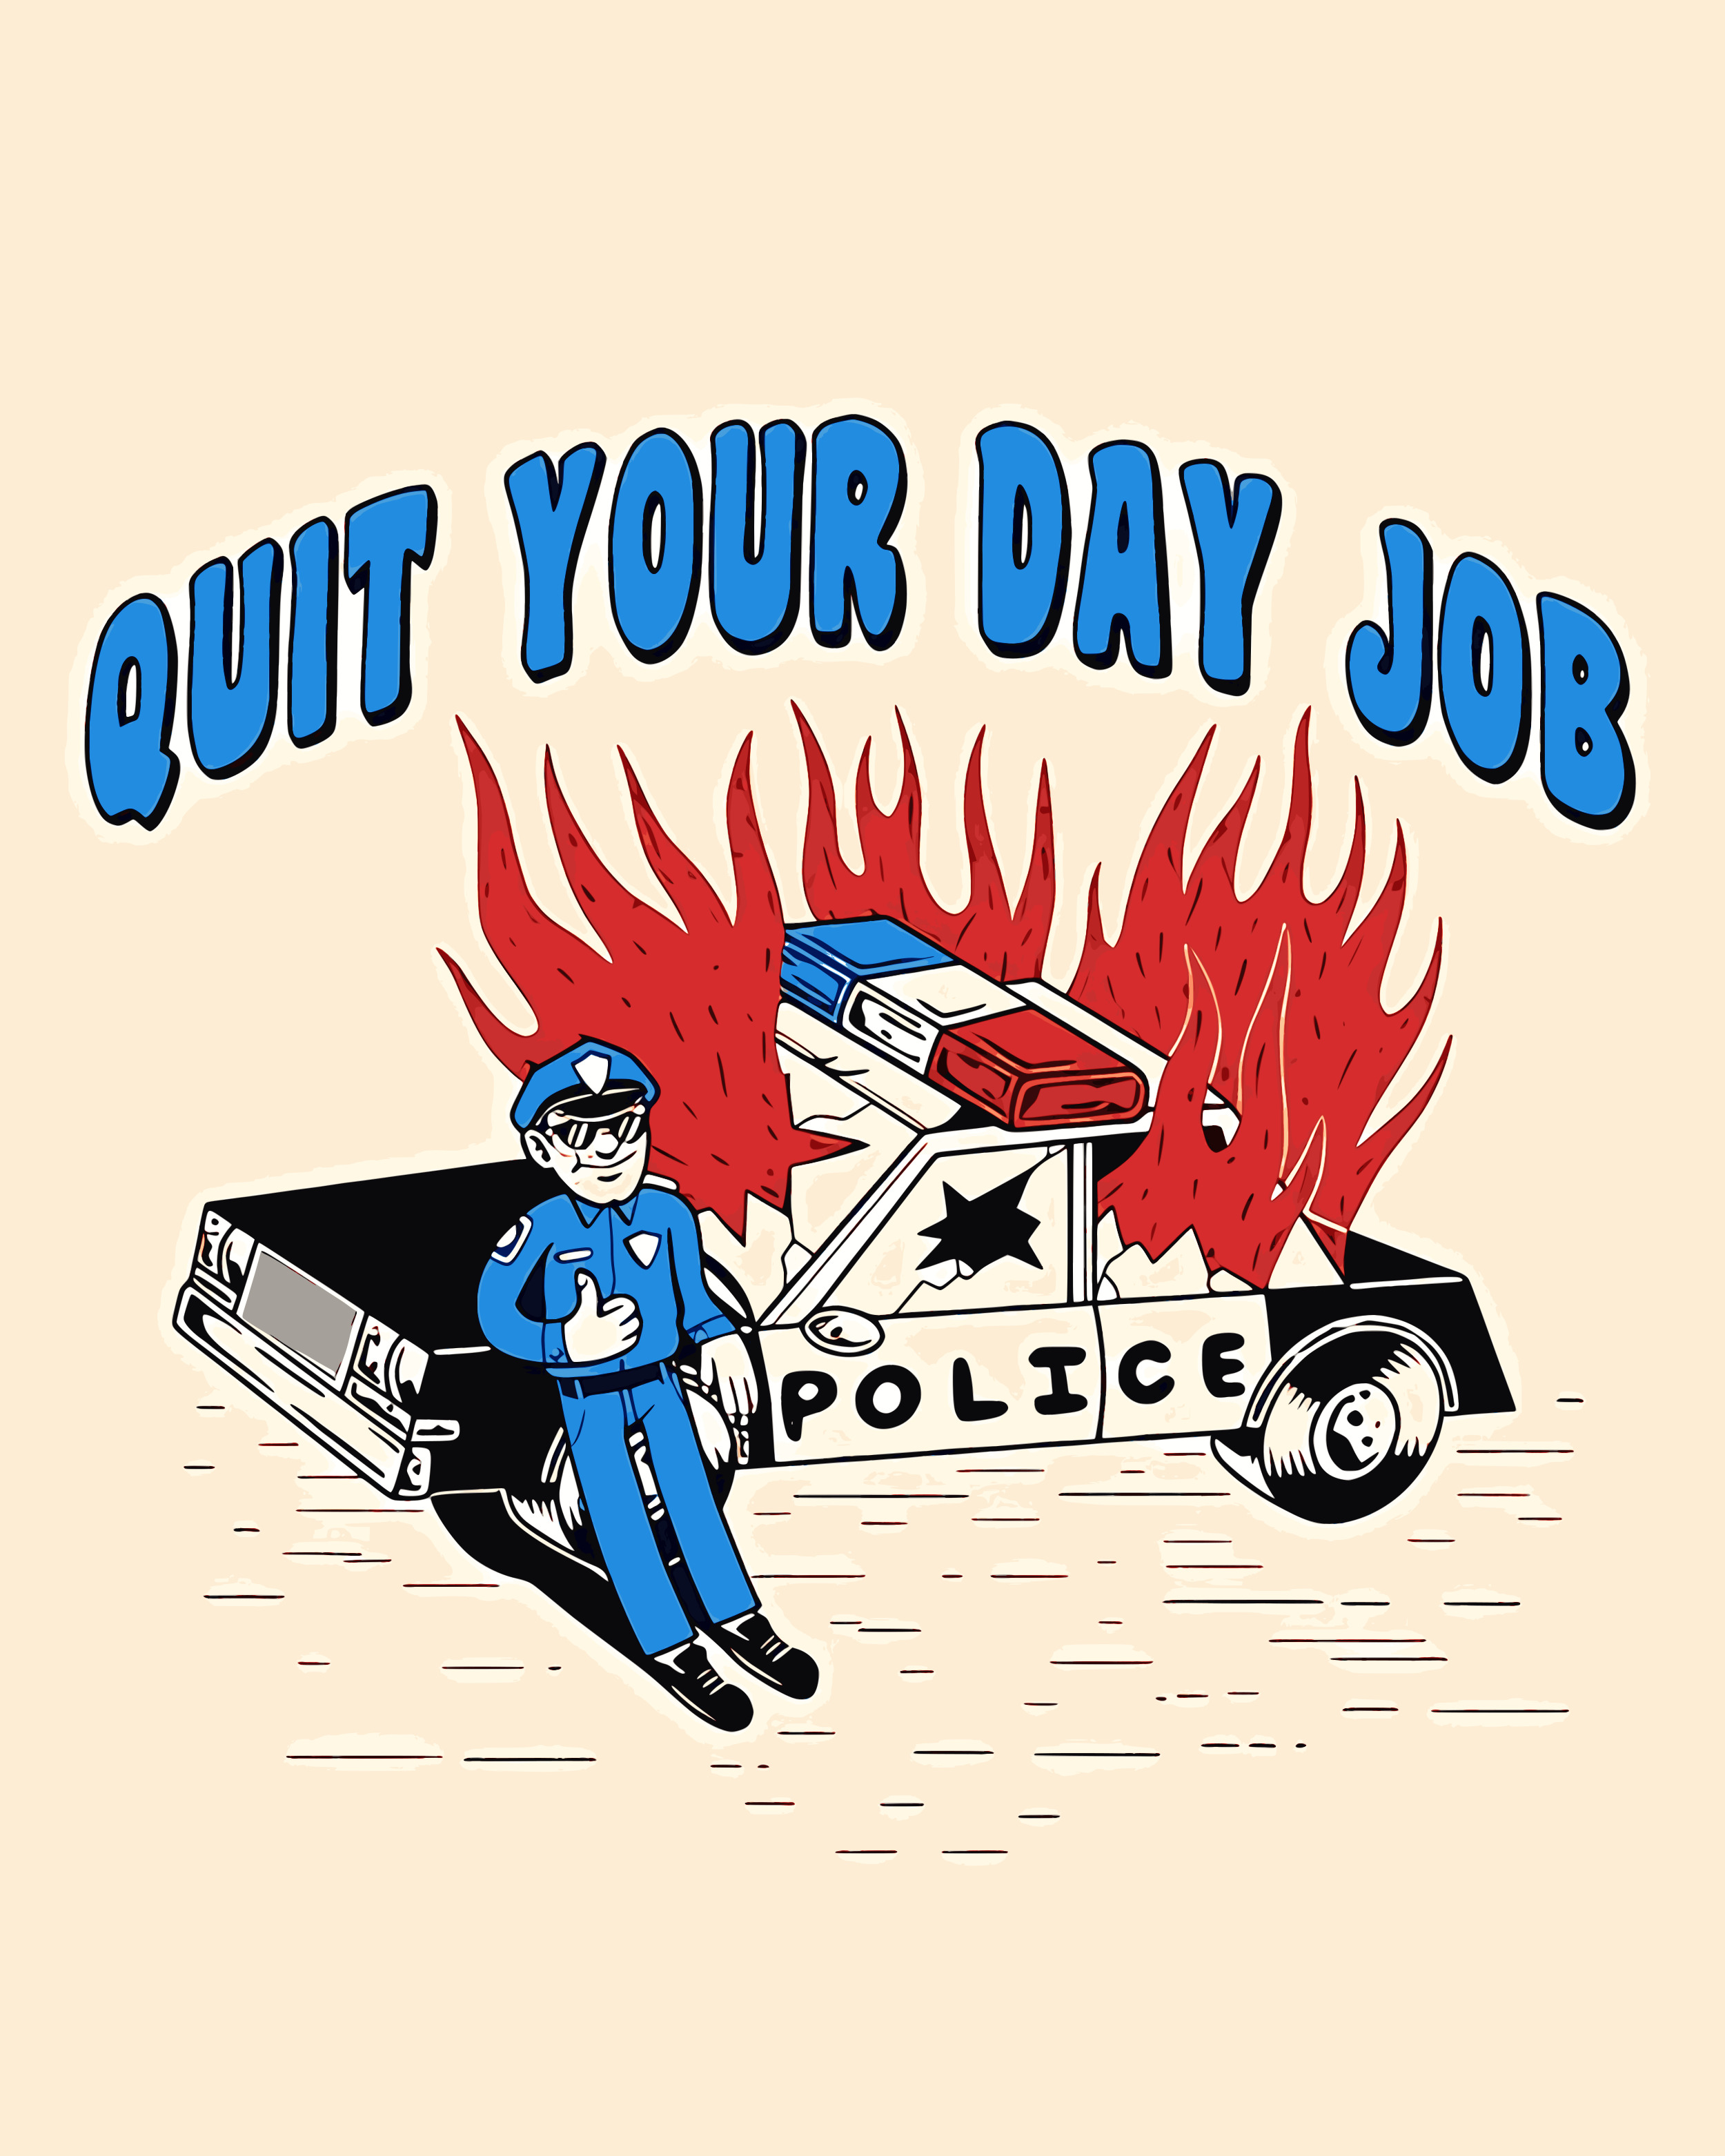 Quit your day job